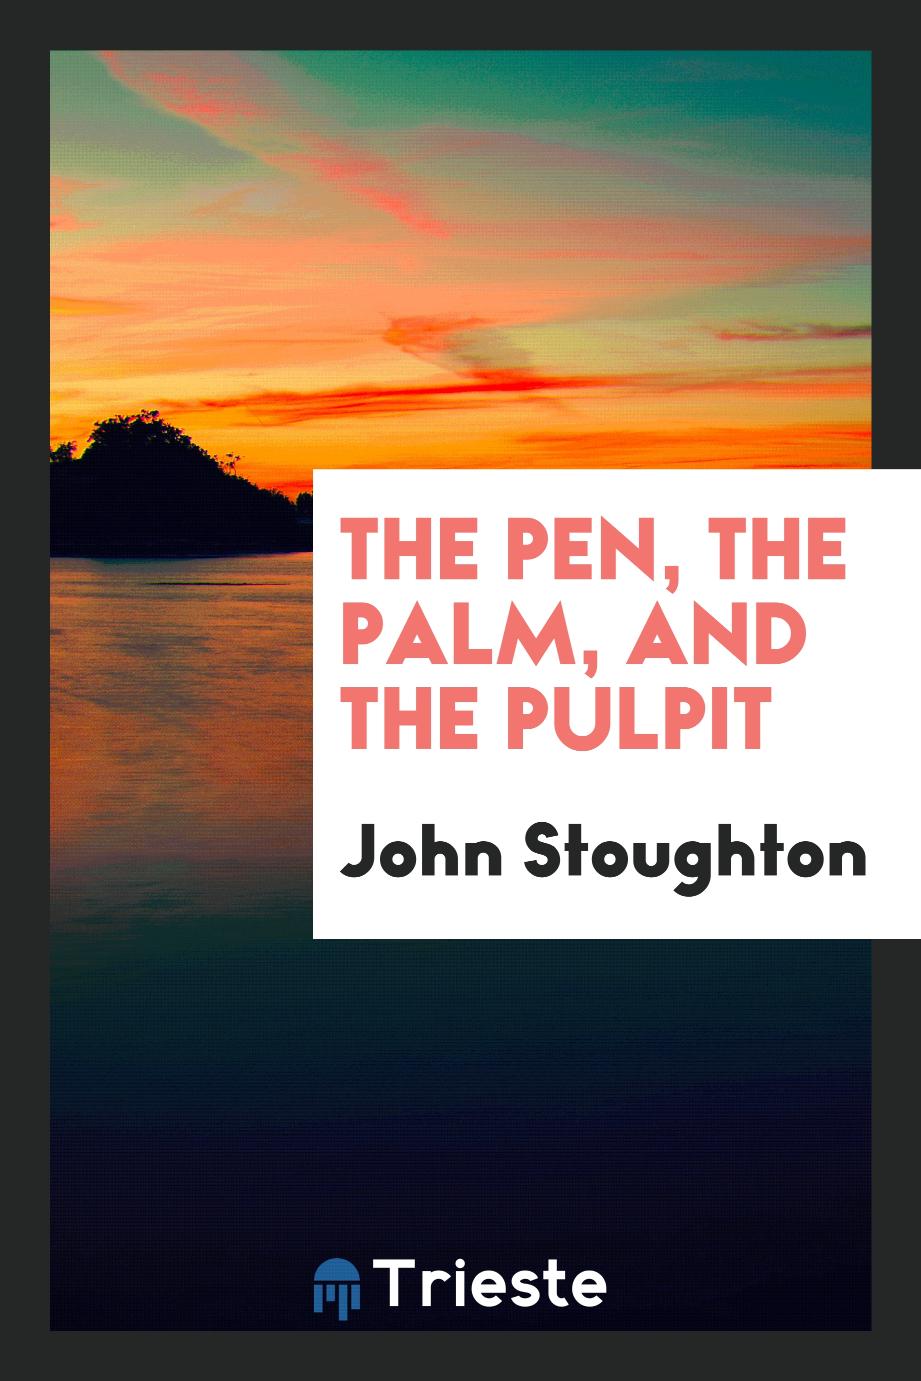 The Pen, the Palm, and the Pulpit